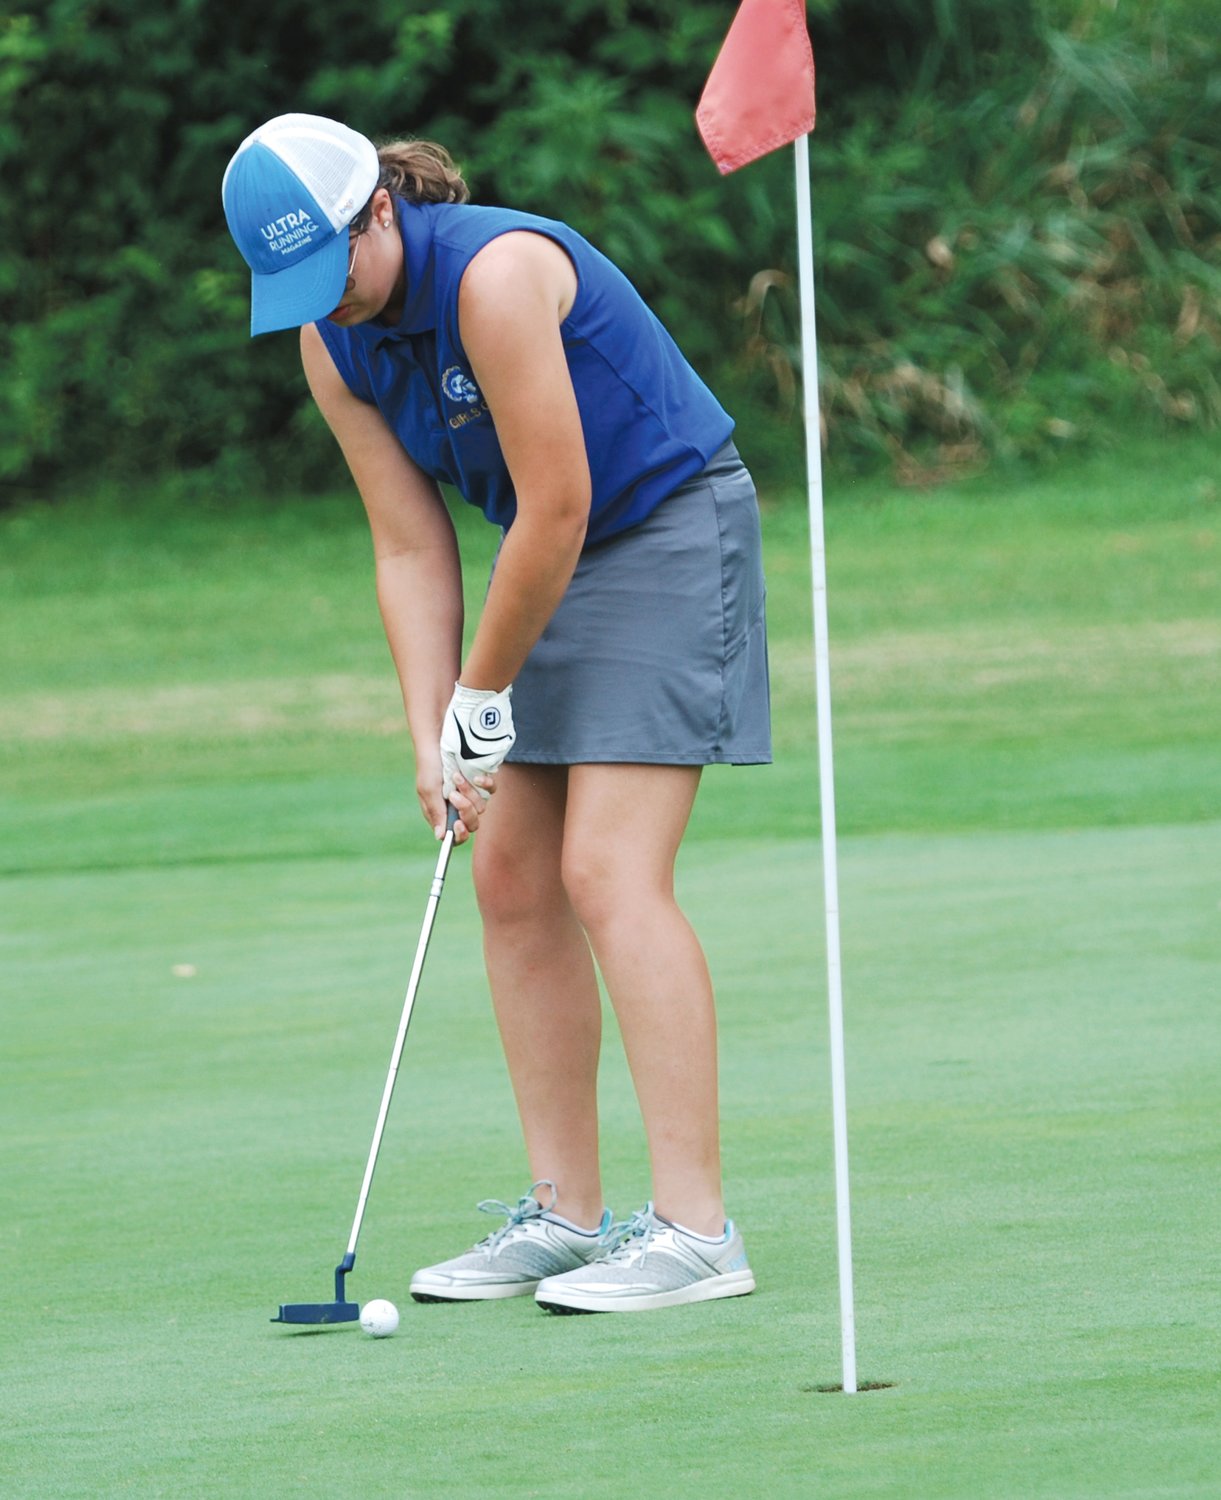 Crawfordsville's Gwyn Redding sinks a short putt for the Athenians on No. 15 on Thursday evening against University and Covington. Redding shot a 57.